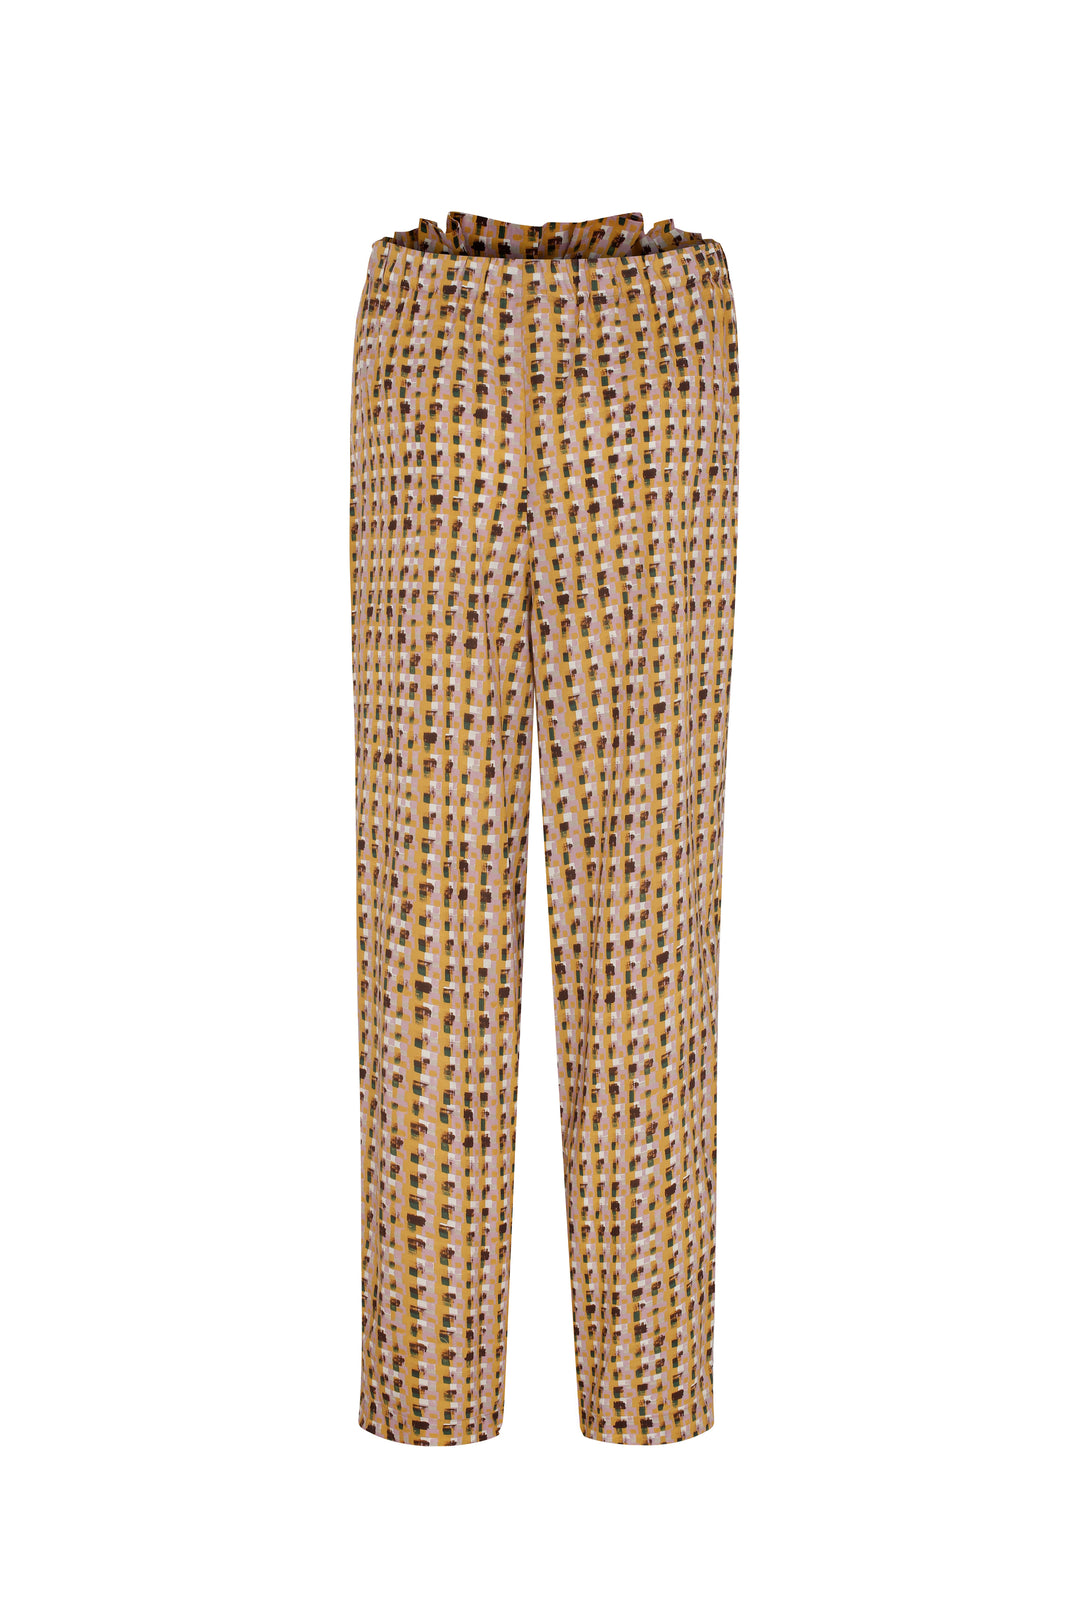 Arya - Printed Relaxed Fit Pants